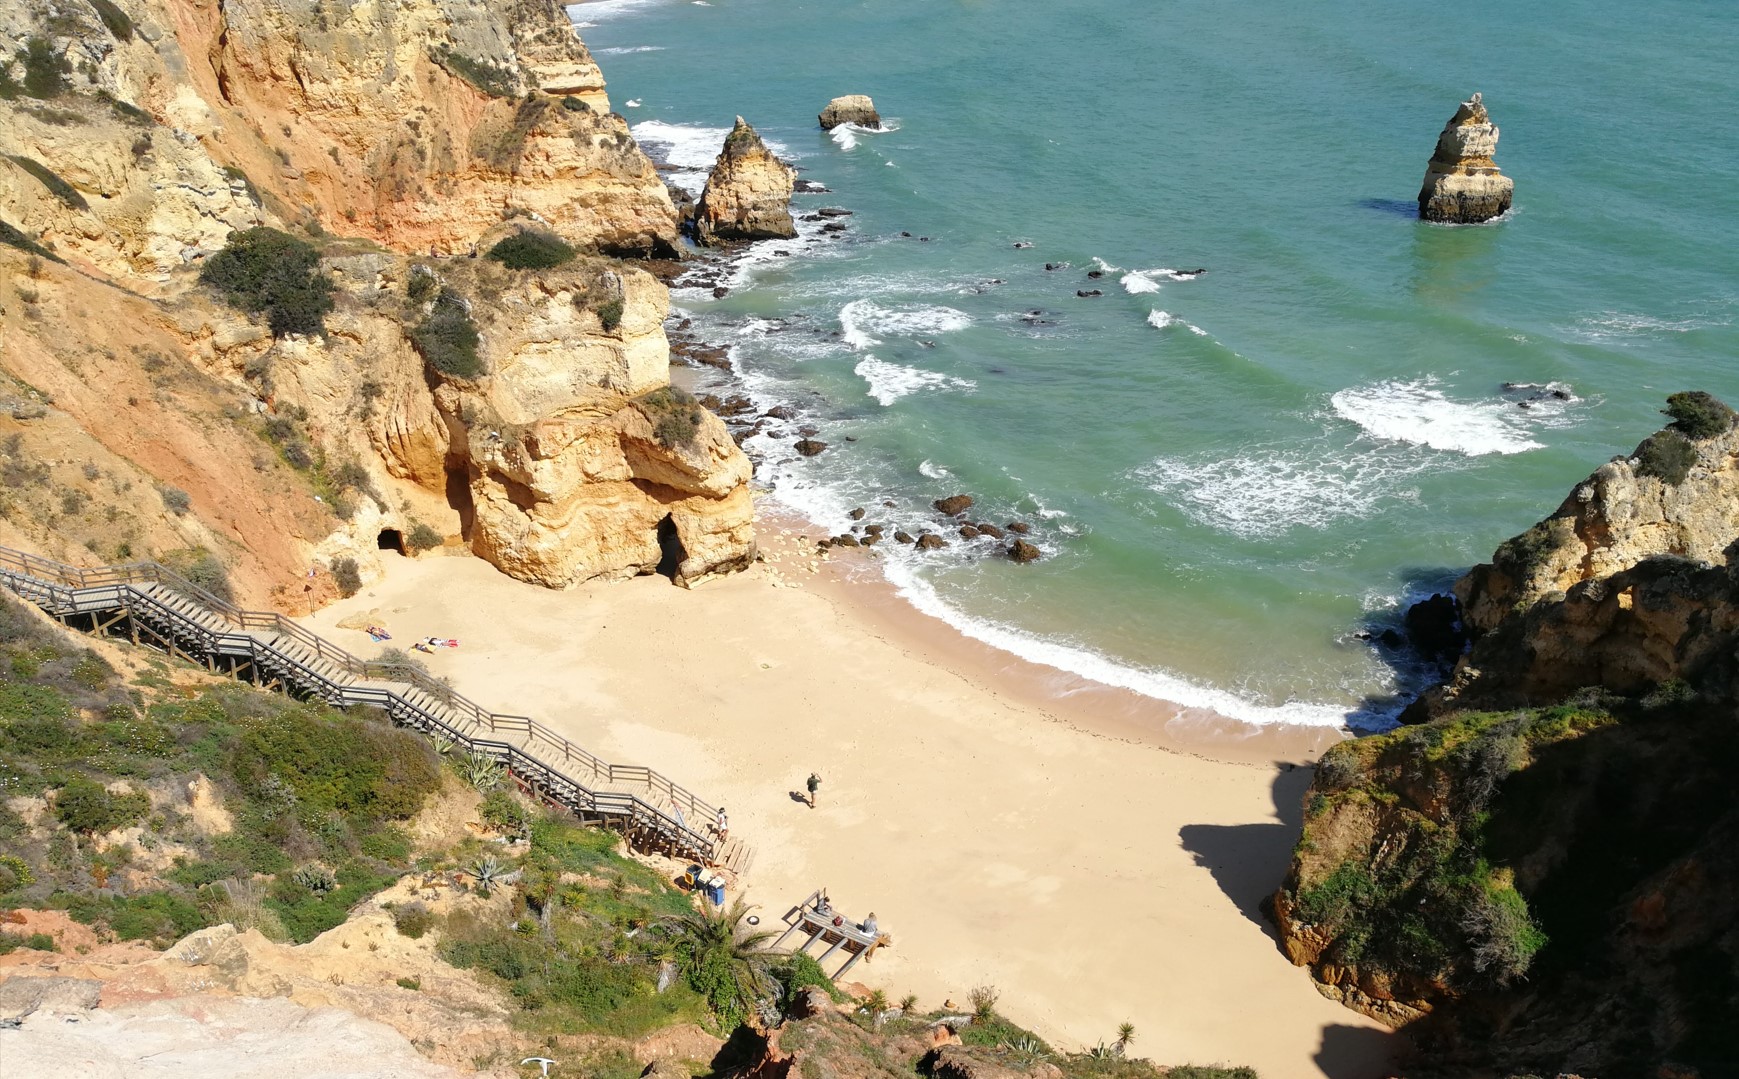 Praia do Camilo - one of the best beaches in Portugal